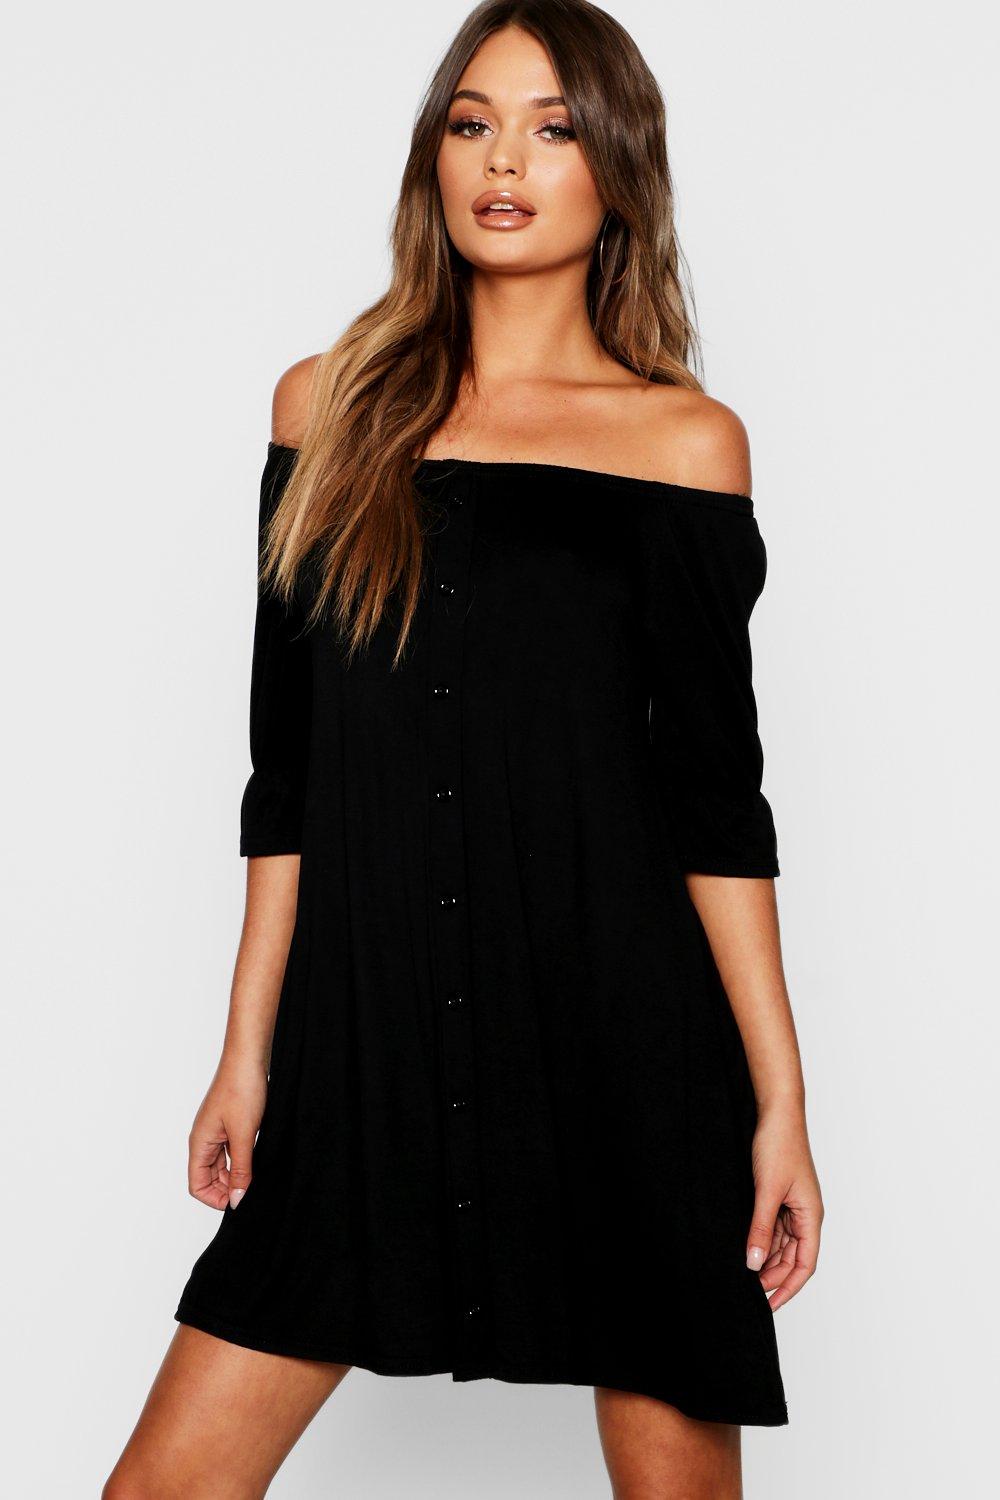 Boohoo Womens Lily Off The Shoulder Button Shift Dress | eBay